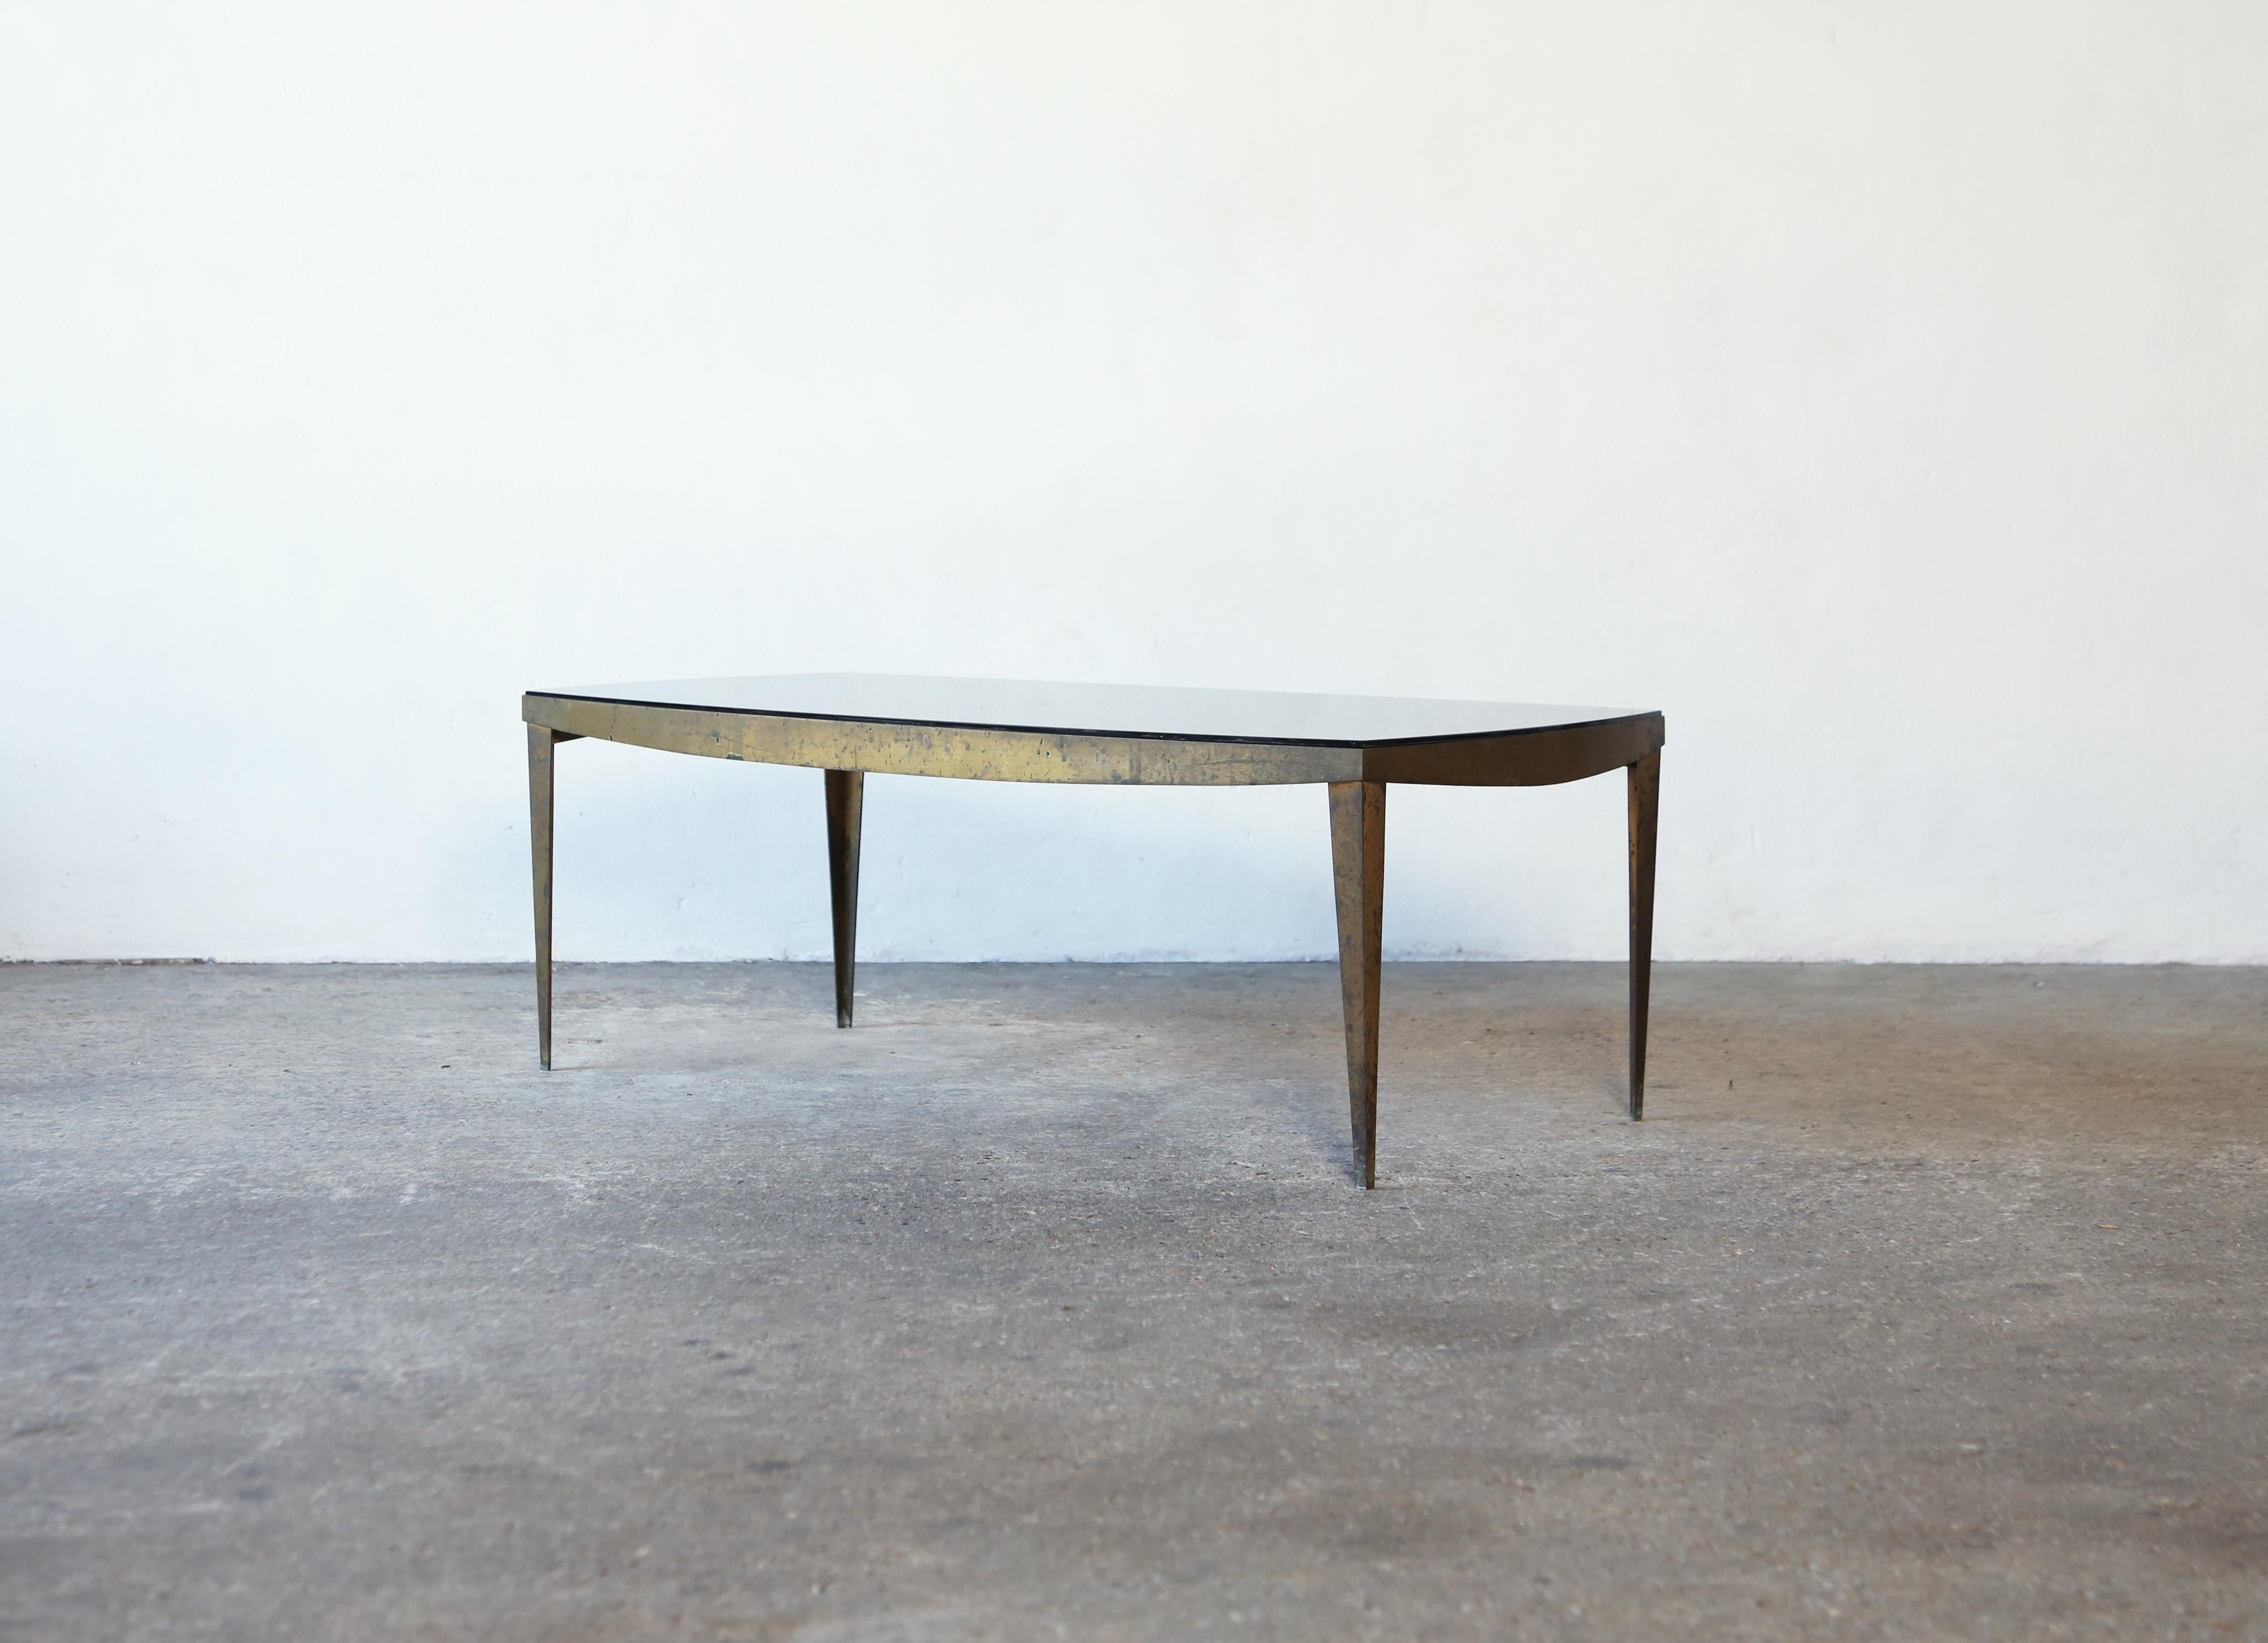 A very rare Max Ingrand Model 2352 Coffee Table, produced by Fontana Arte, Italy, 1960s  Brass, gold leaf and mirrored, tinted glass.   In original condition with signs of use and age.   Fast shipping worldwide.

Bibliography: Quaderni Fontana Arte,